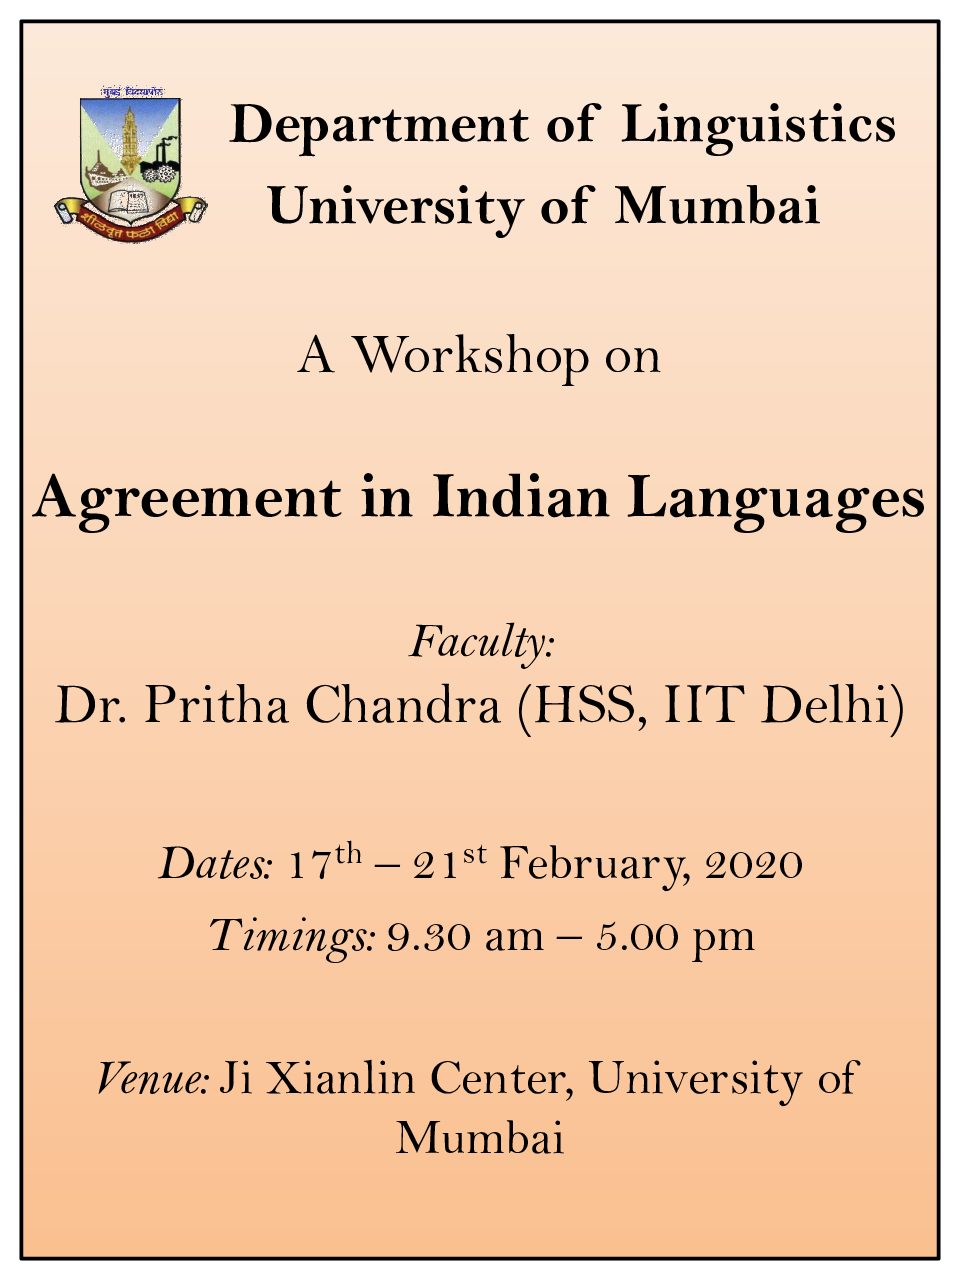 Workshop on Agreement in Indian Languages